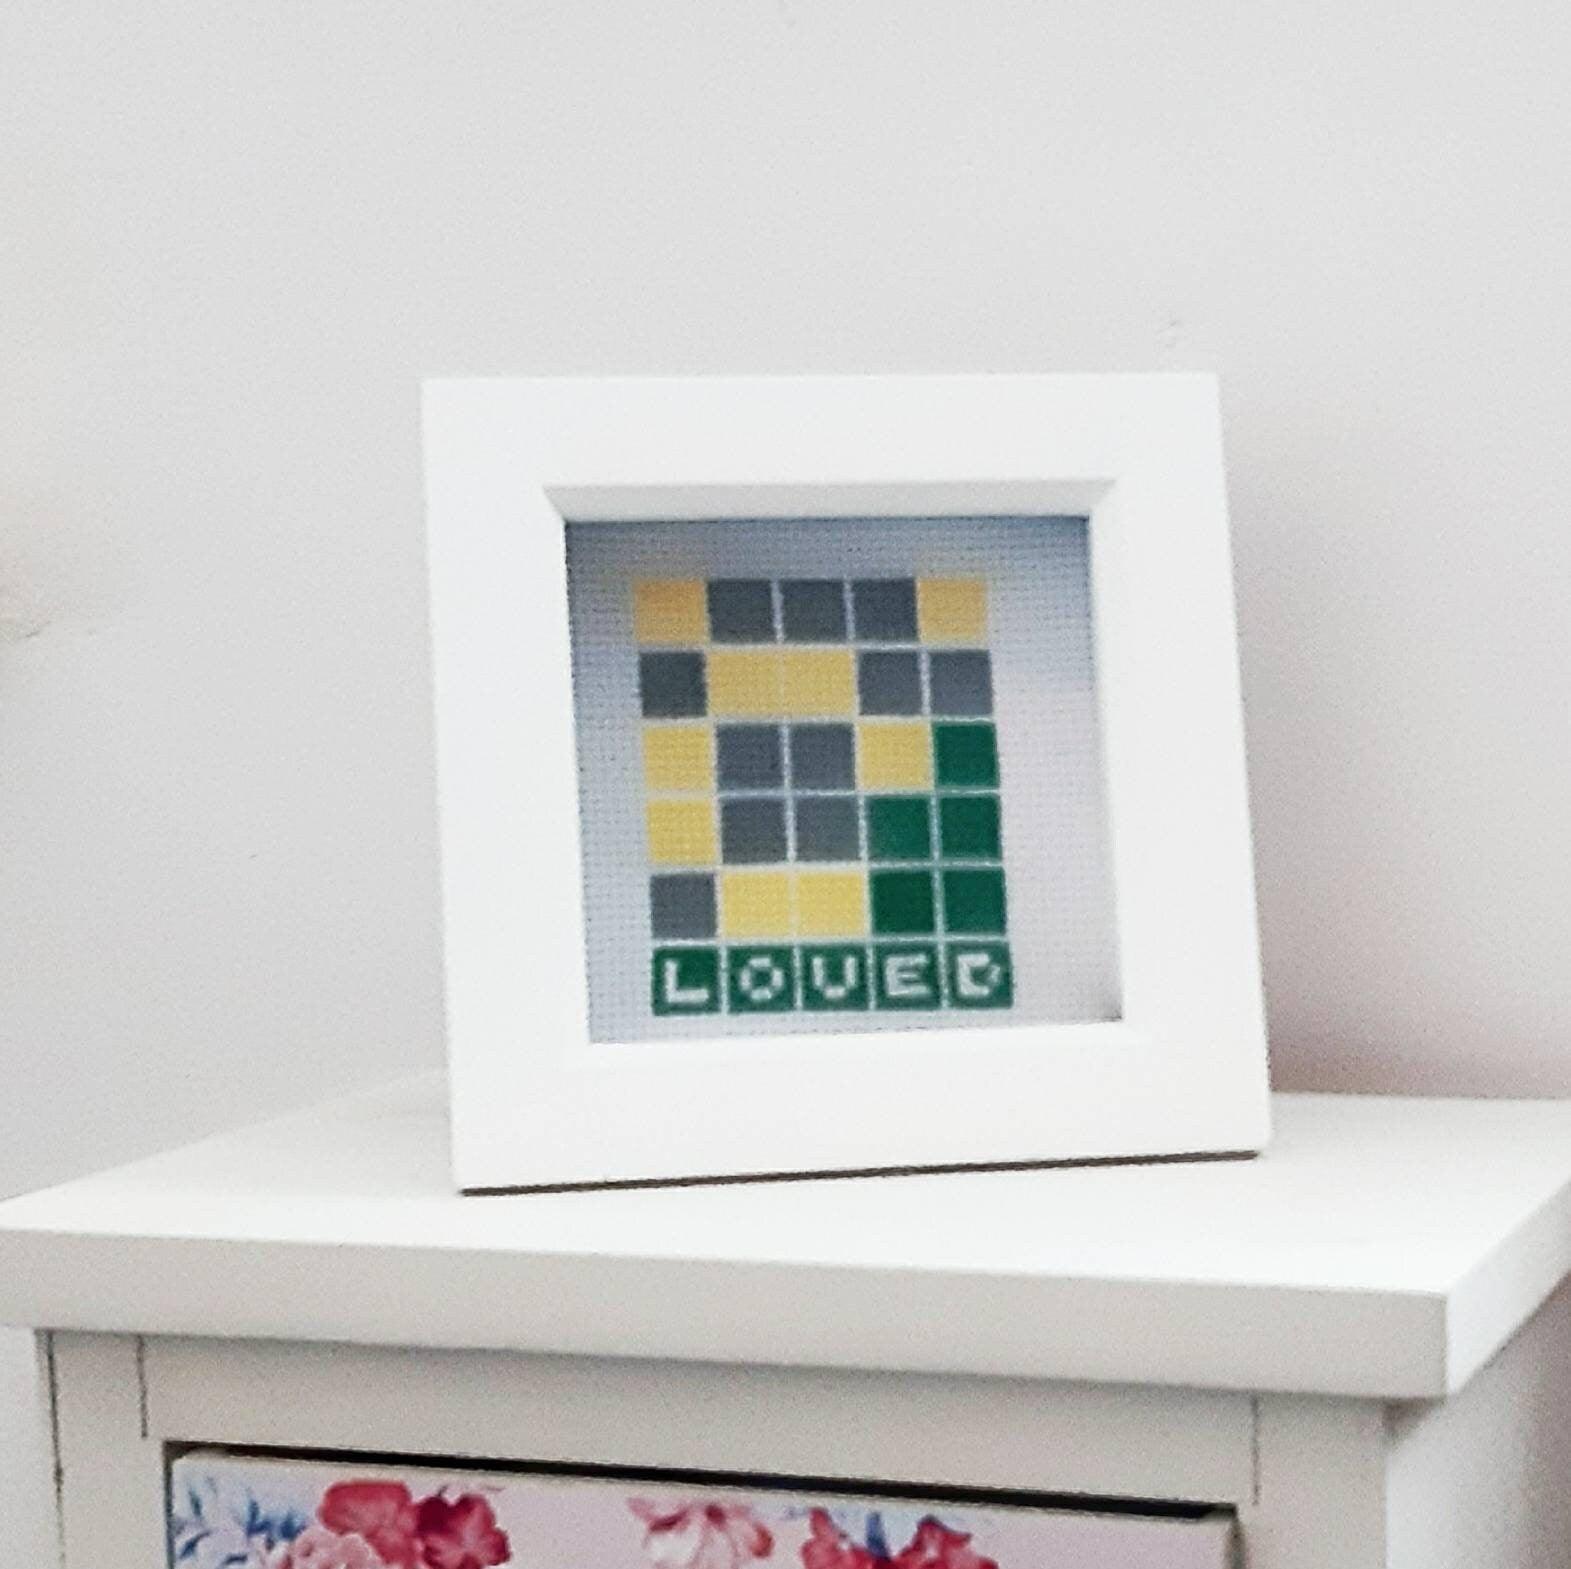 Completed cross stitch showing a wordle game with the solution being the word 'loved'. It is on white fabric, with a white square chunky frame. Frame is positioned on drawers to illustrate size